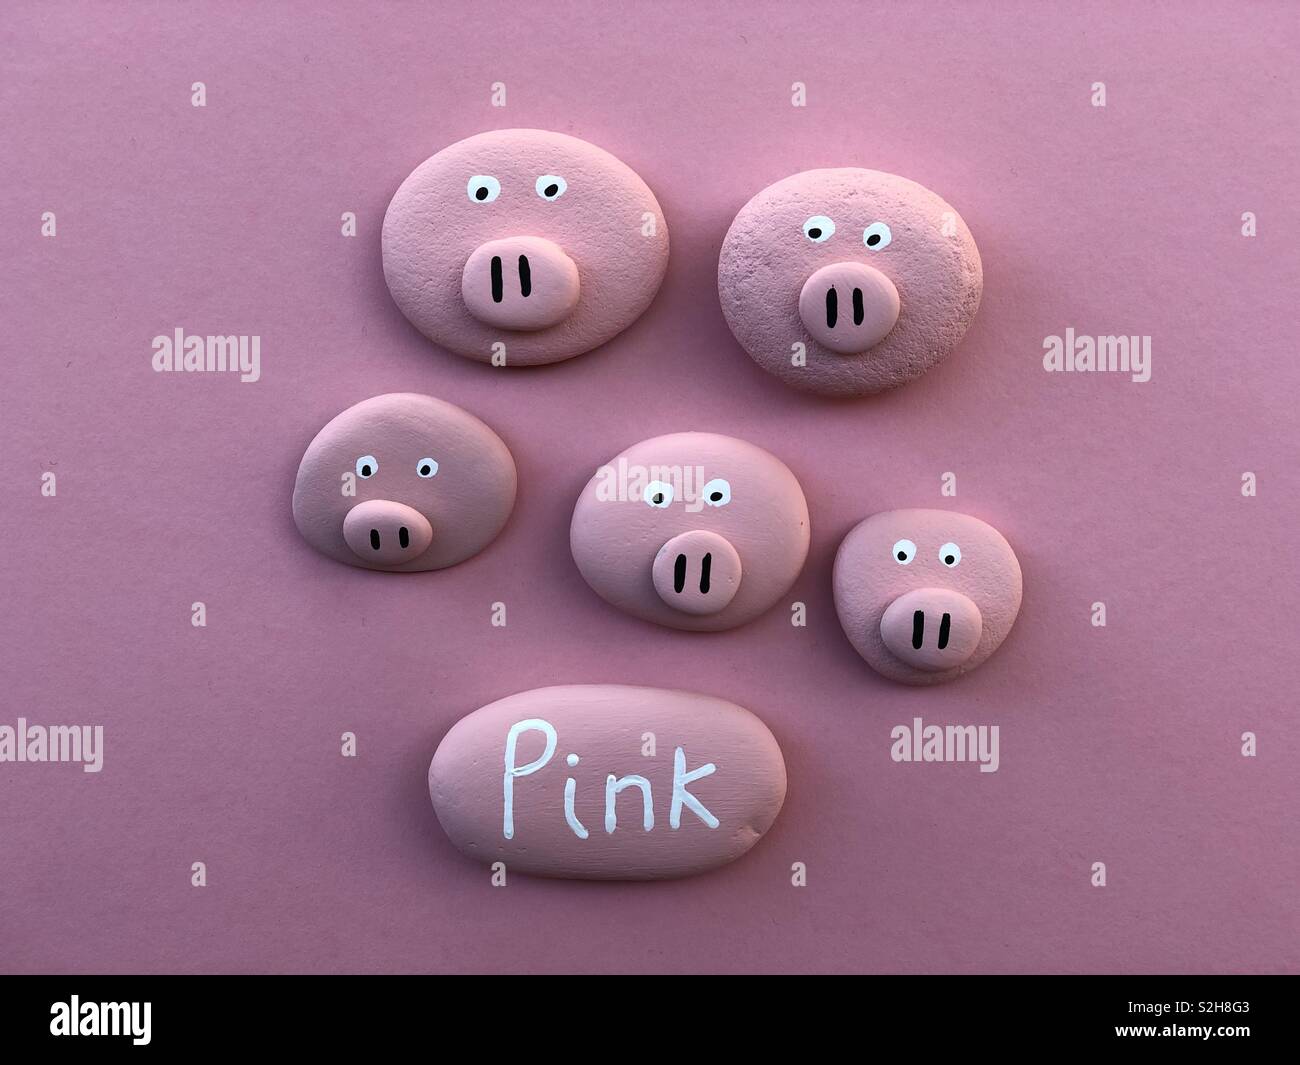 Pink pigs family, conceptual composition with stones Stock Photo